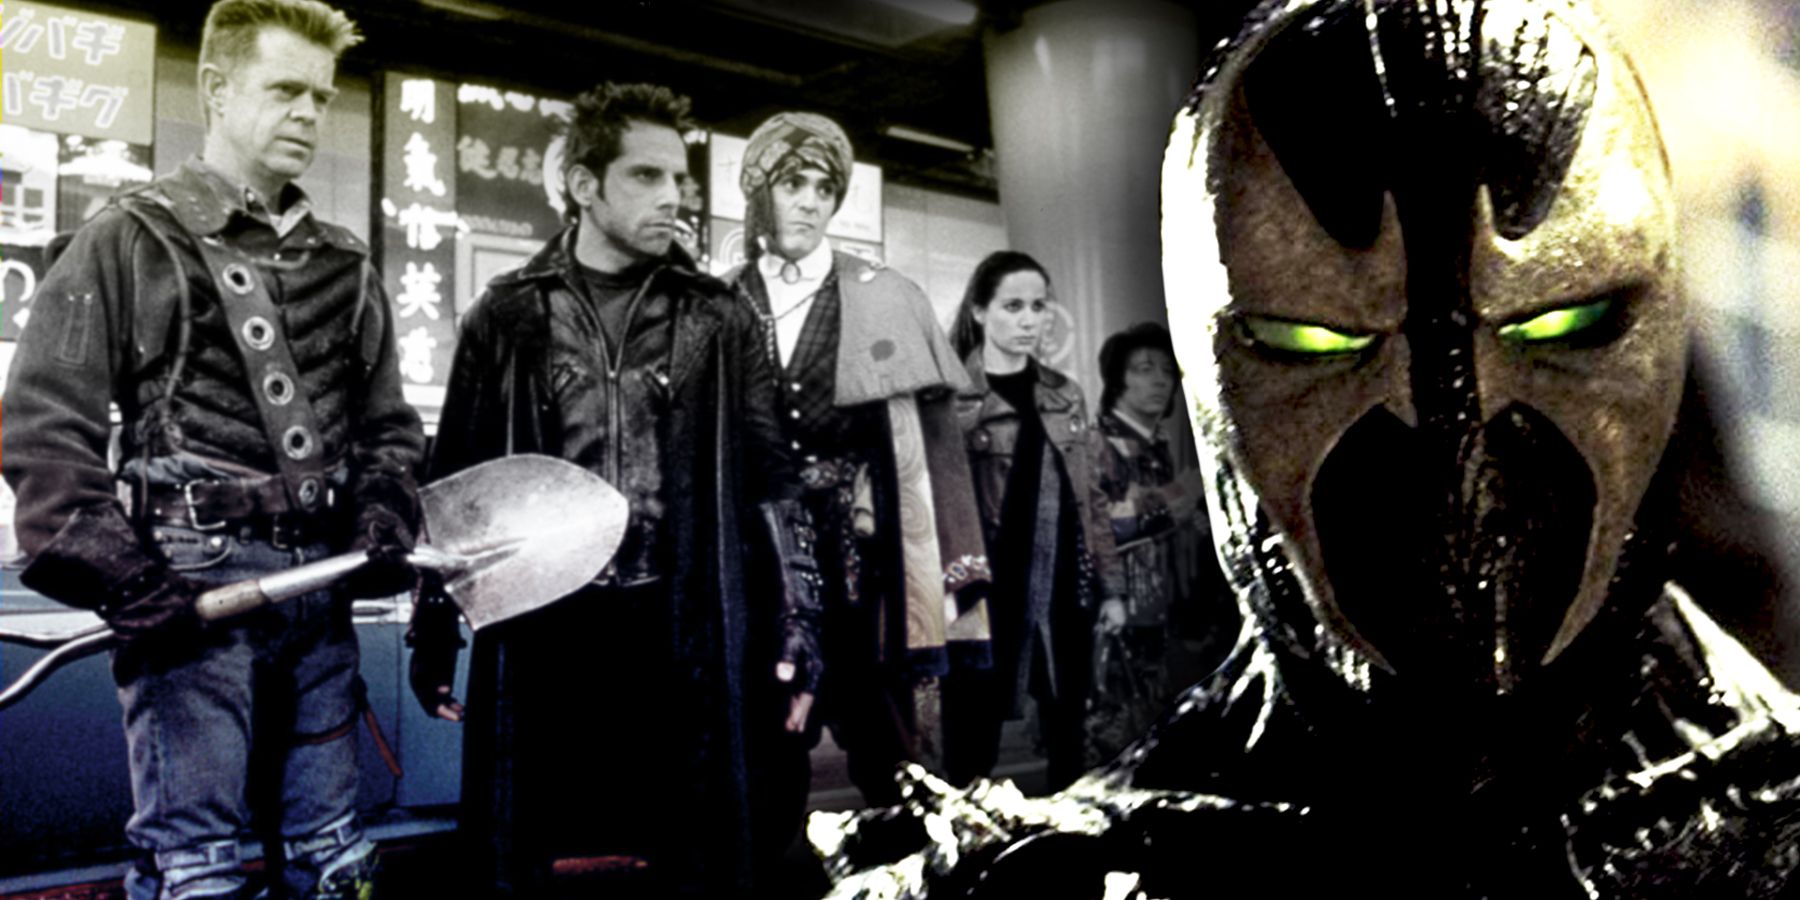 A split image of the film The Mystery Men and the live action Spawn